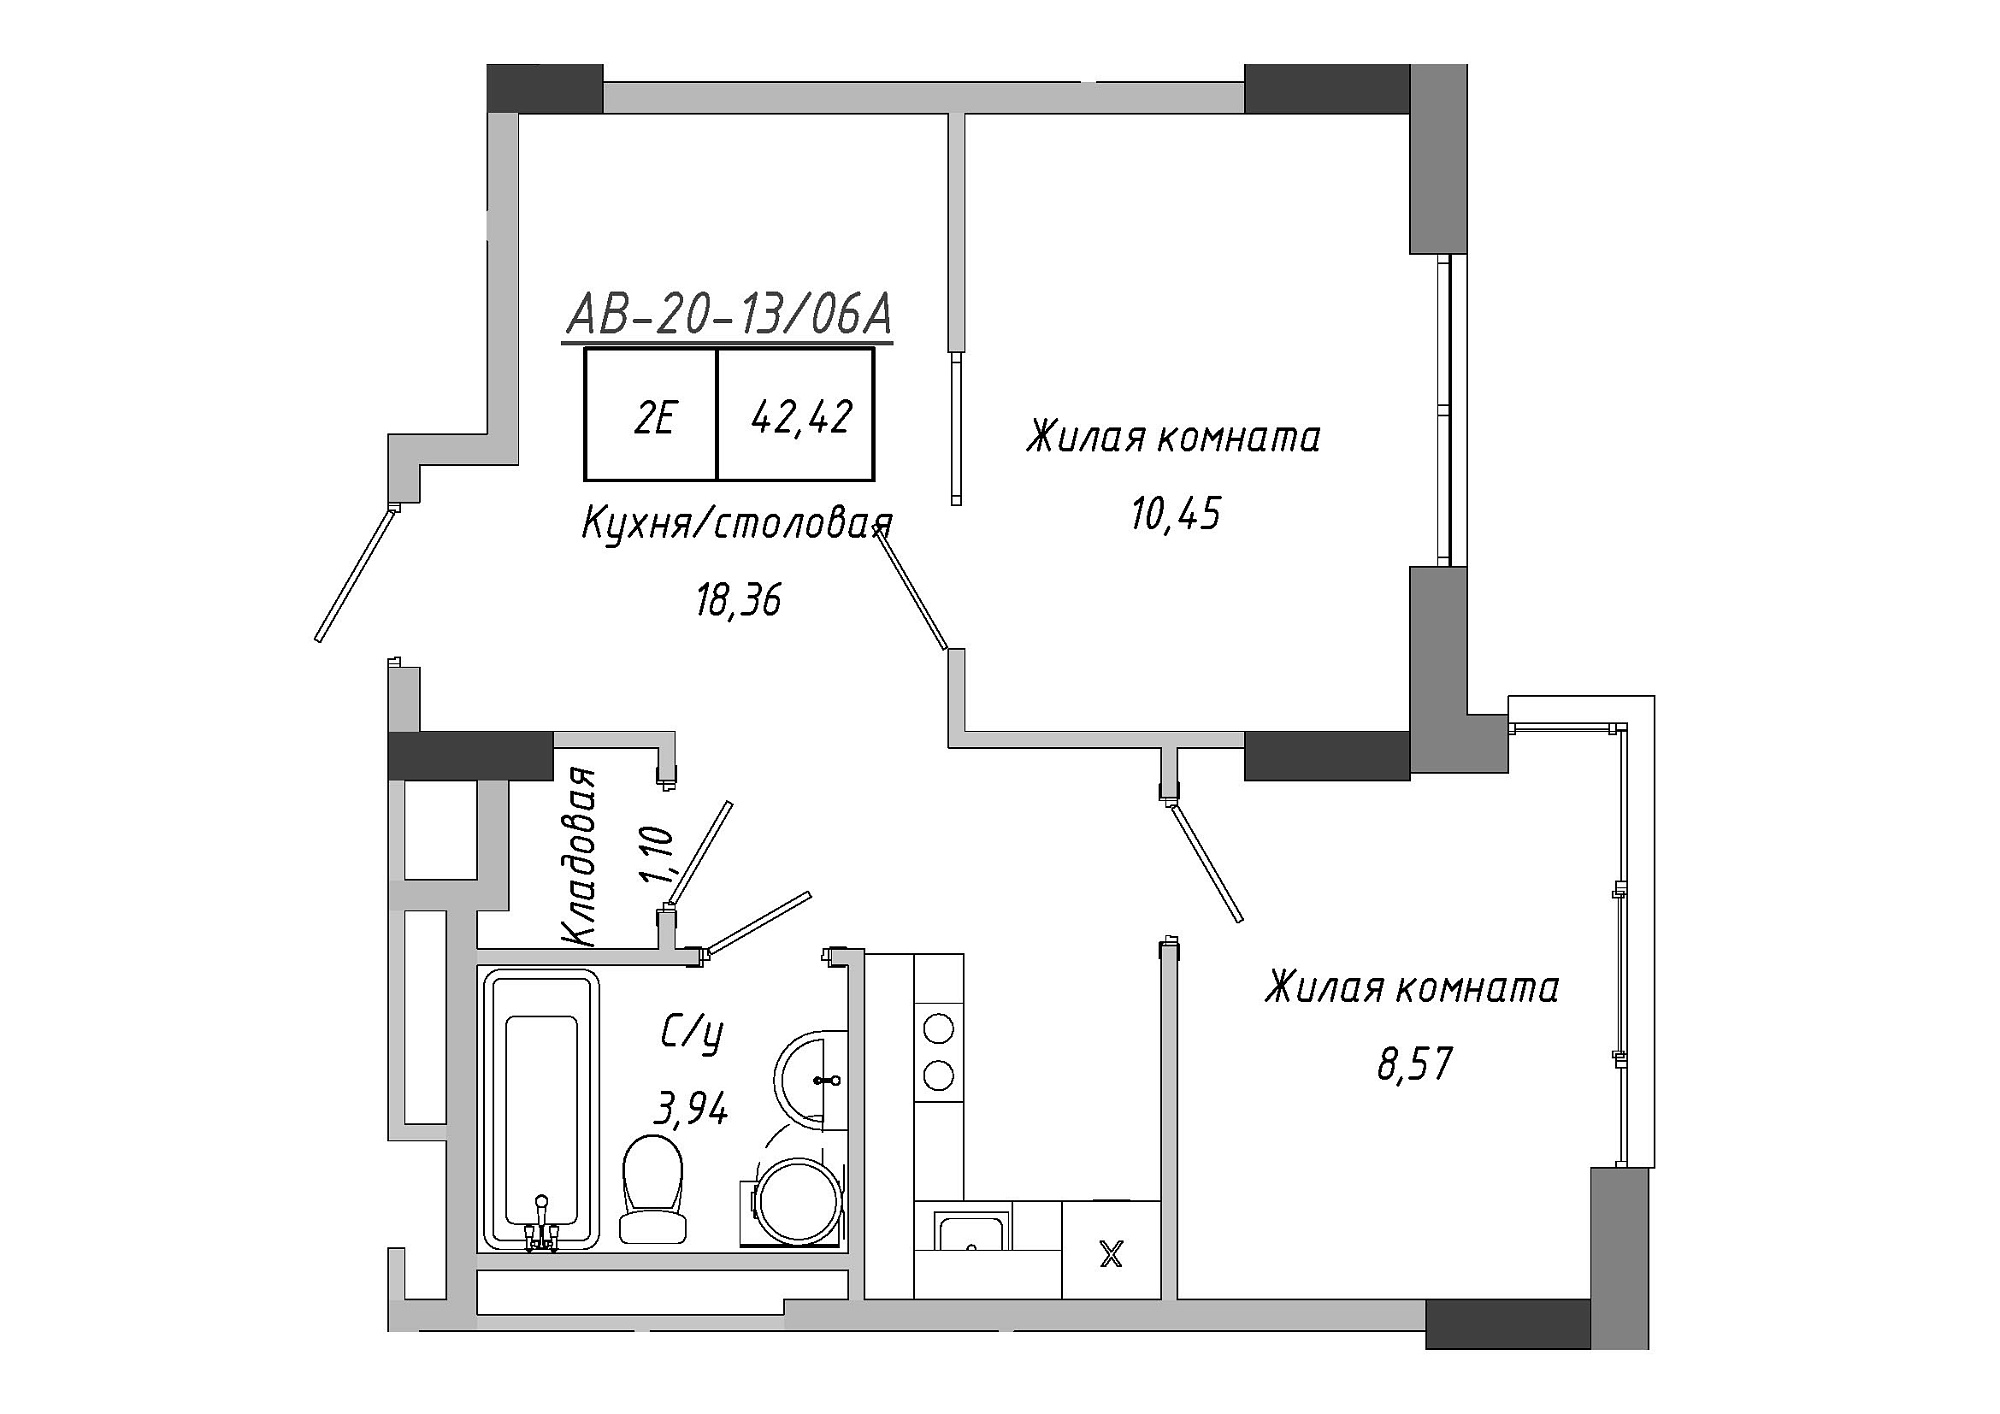 Planning 2-rm flats area 42.42m2, AB-20-13/0106a.